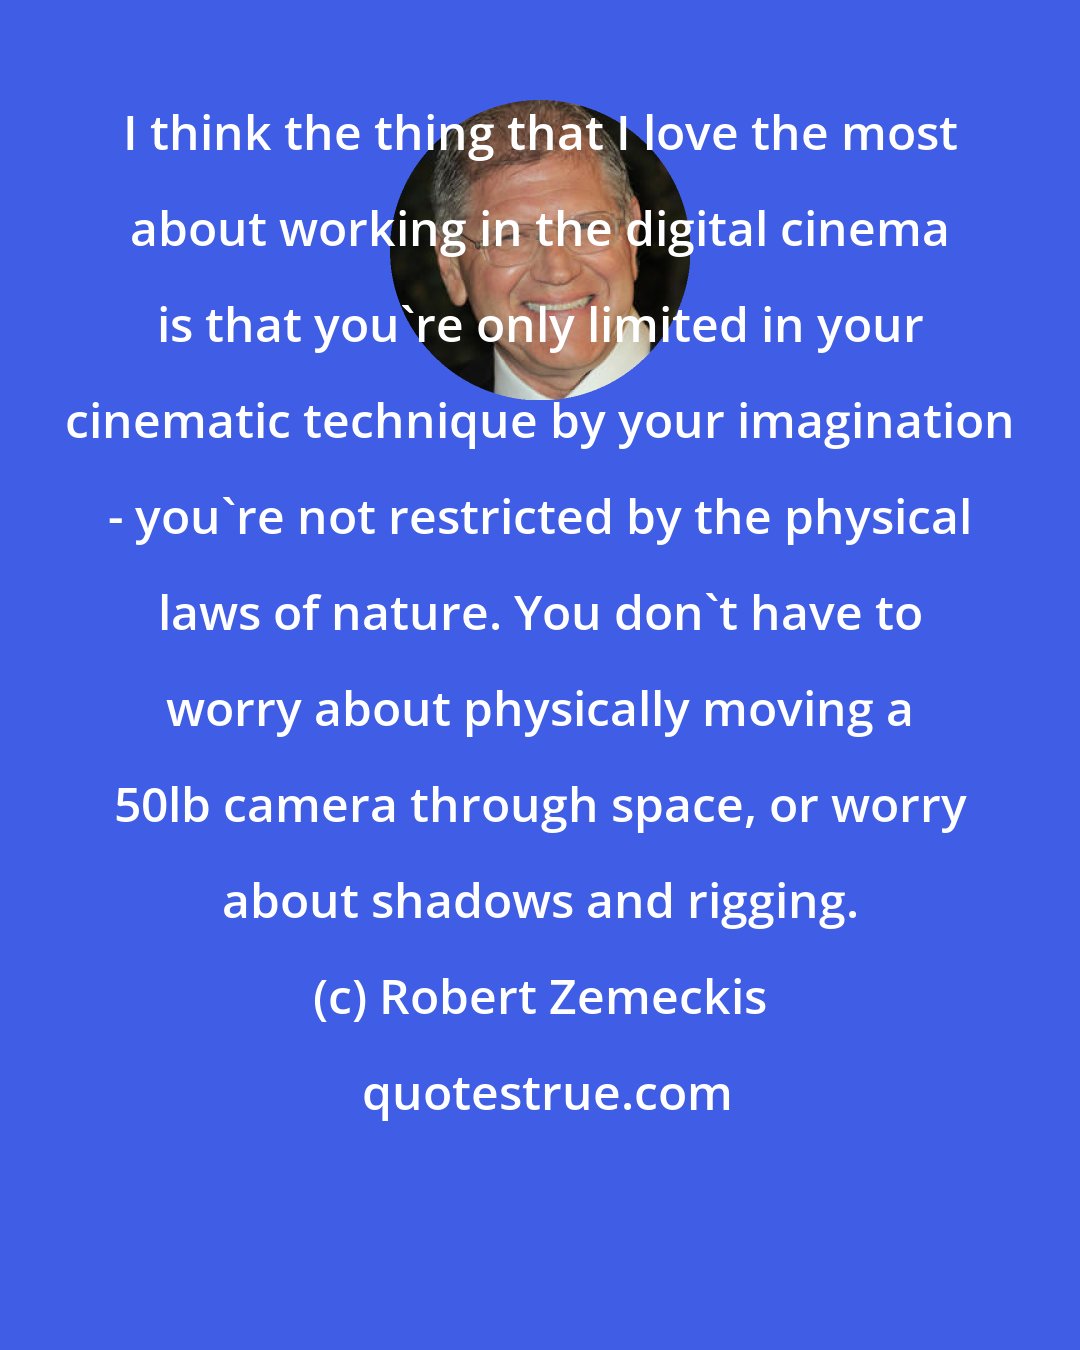 Robert Zemeckis: I think the thing that I love the most about working in the digital cinema is that you're only limited in your cinematic technique by your imagination - you're not restricted by the physical laws of nature. You don't have to worry about physically moving a 50lb camera through space, or worry about shadows and rigging.